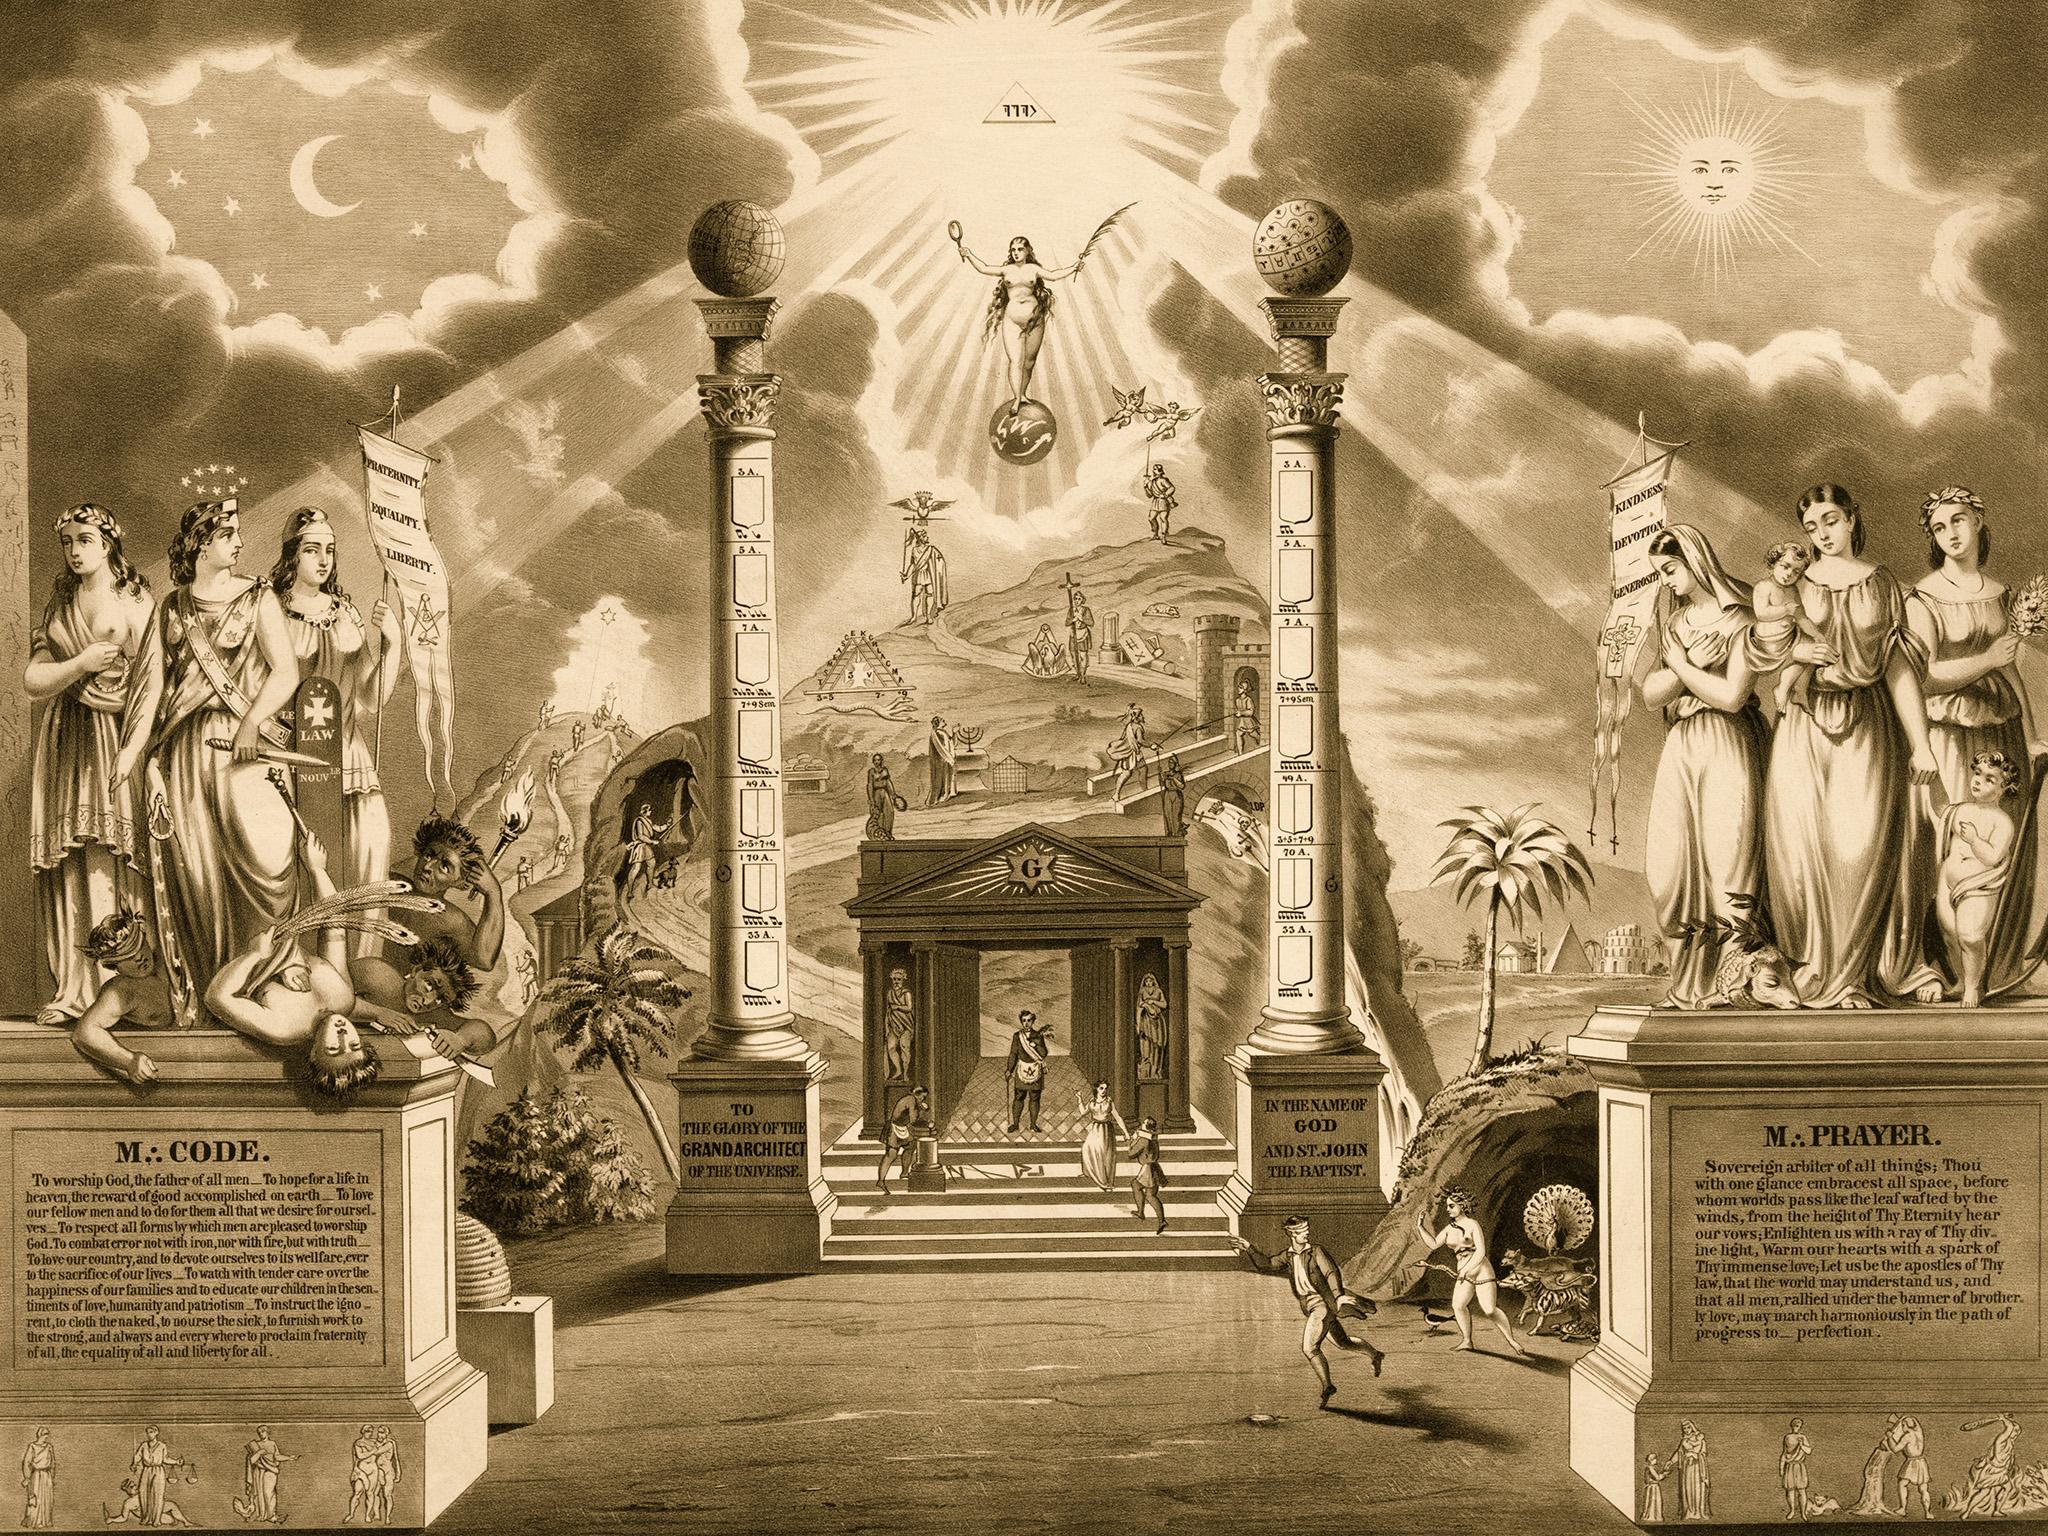 Symbolism features heavily in the Freemasons’ imagery